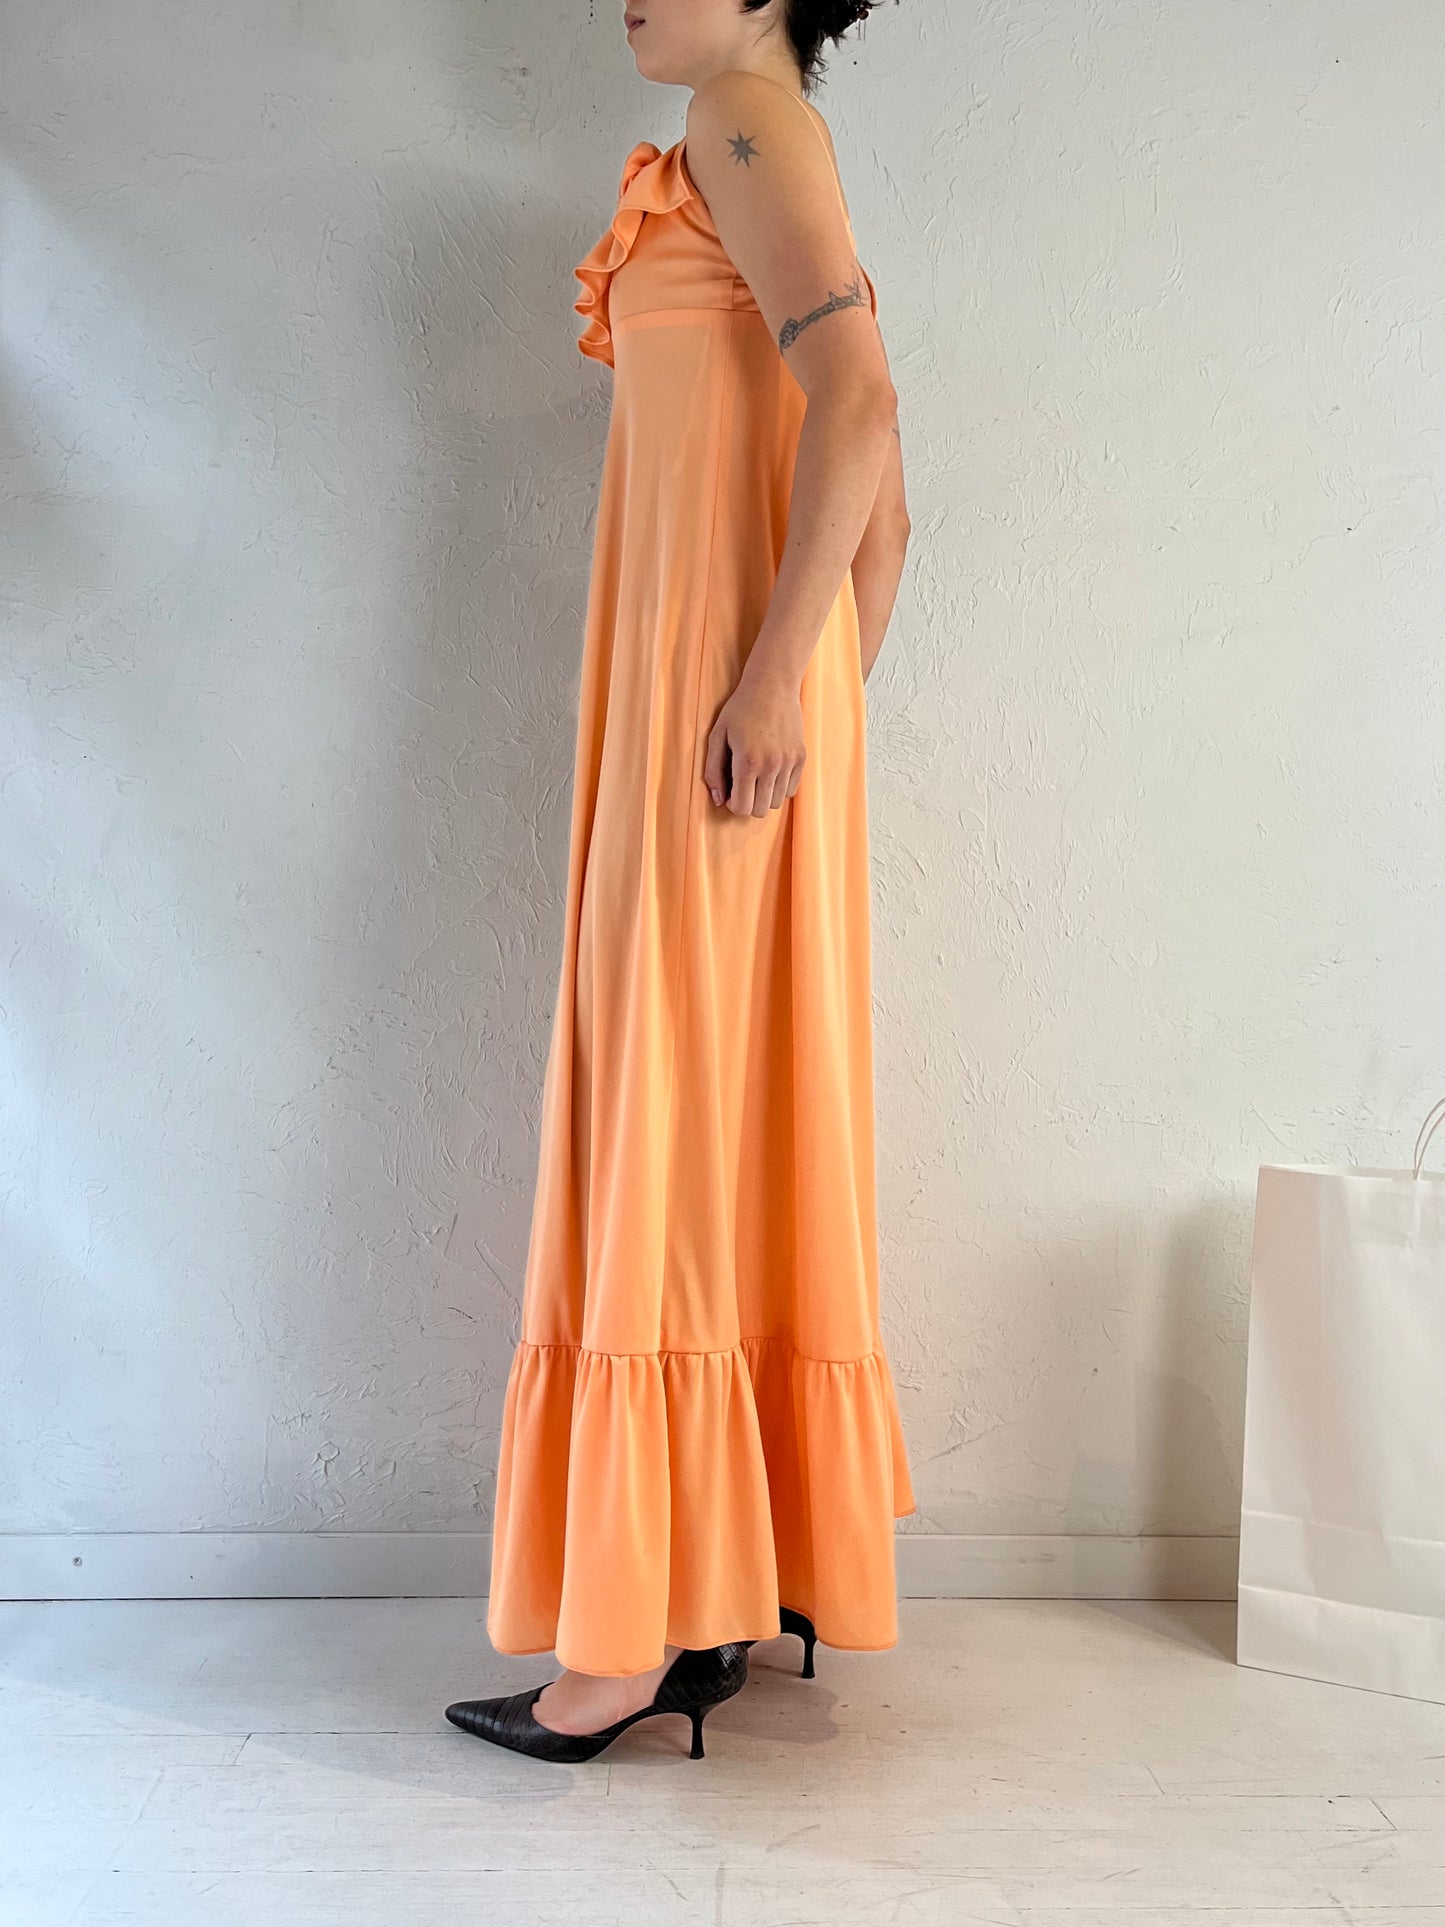 70s 'Nu Mode' Peachy Pink Strapless Maxi Dress / Small